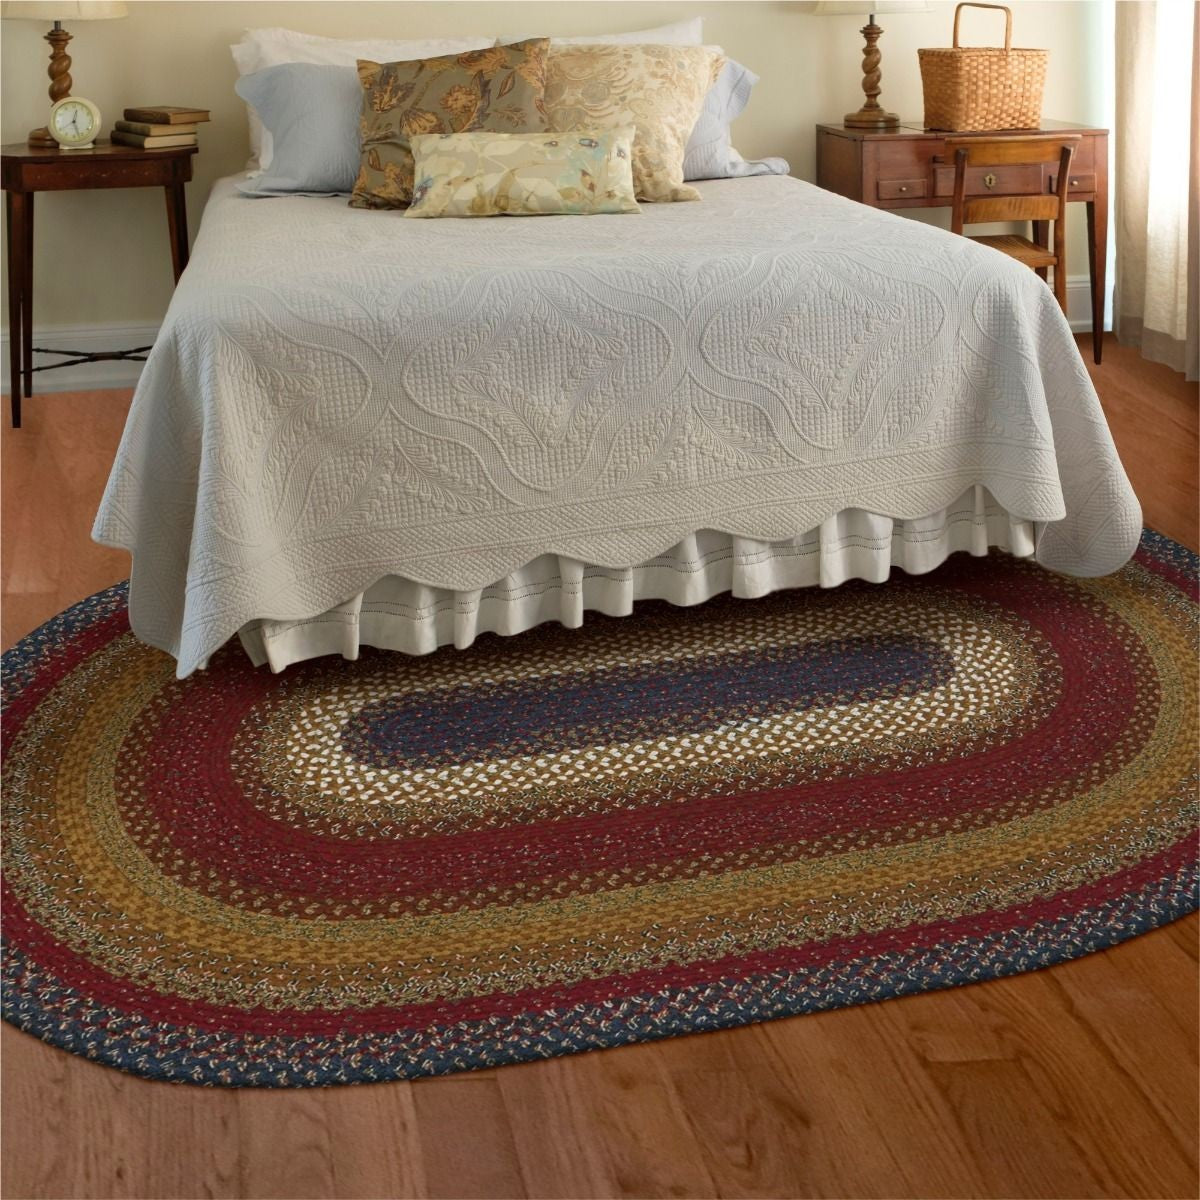 Log Cabin Step Blue and Burgundy Cotton Braided Oval Rugs